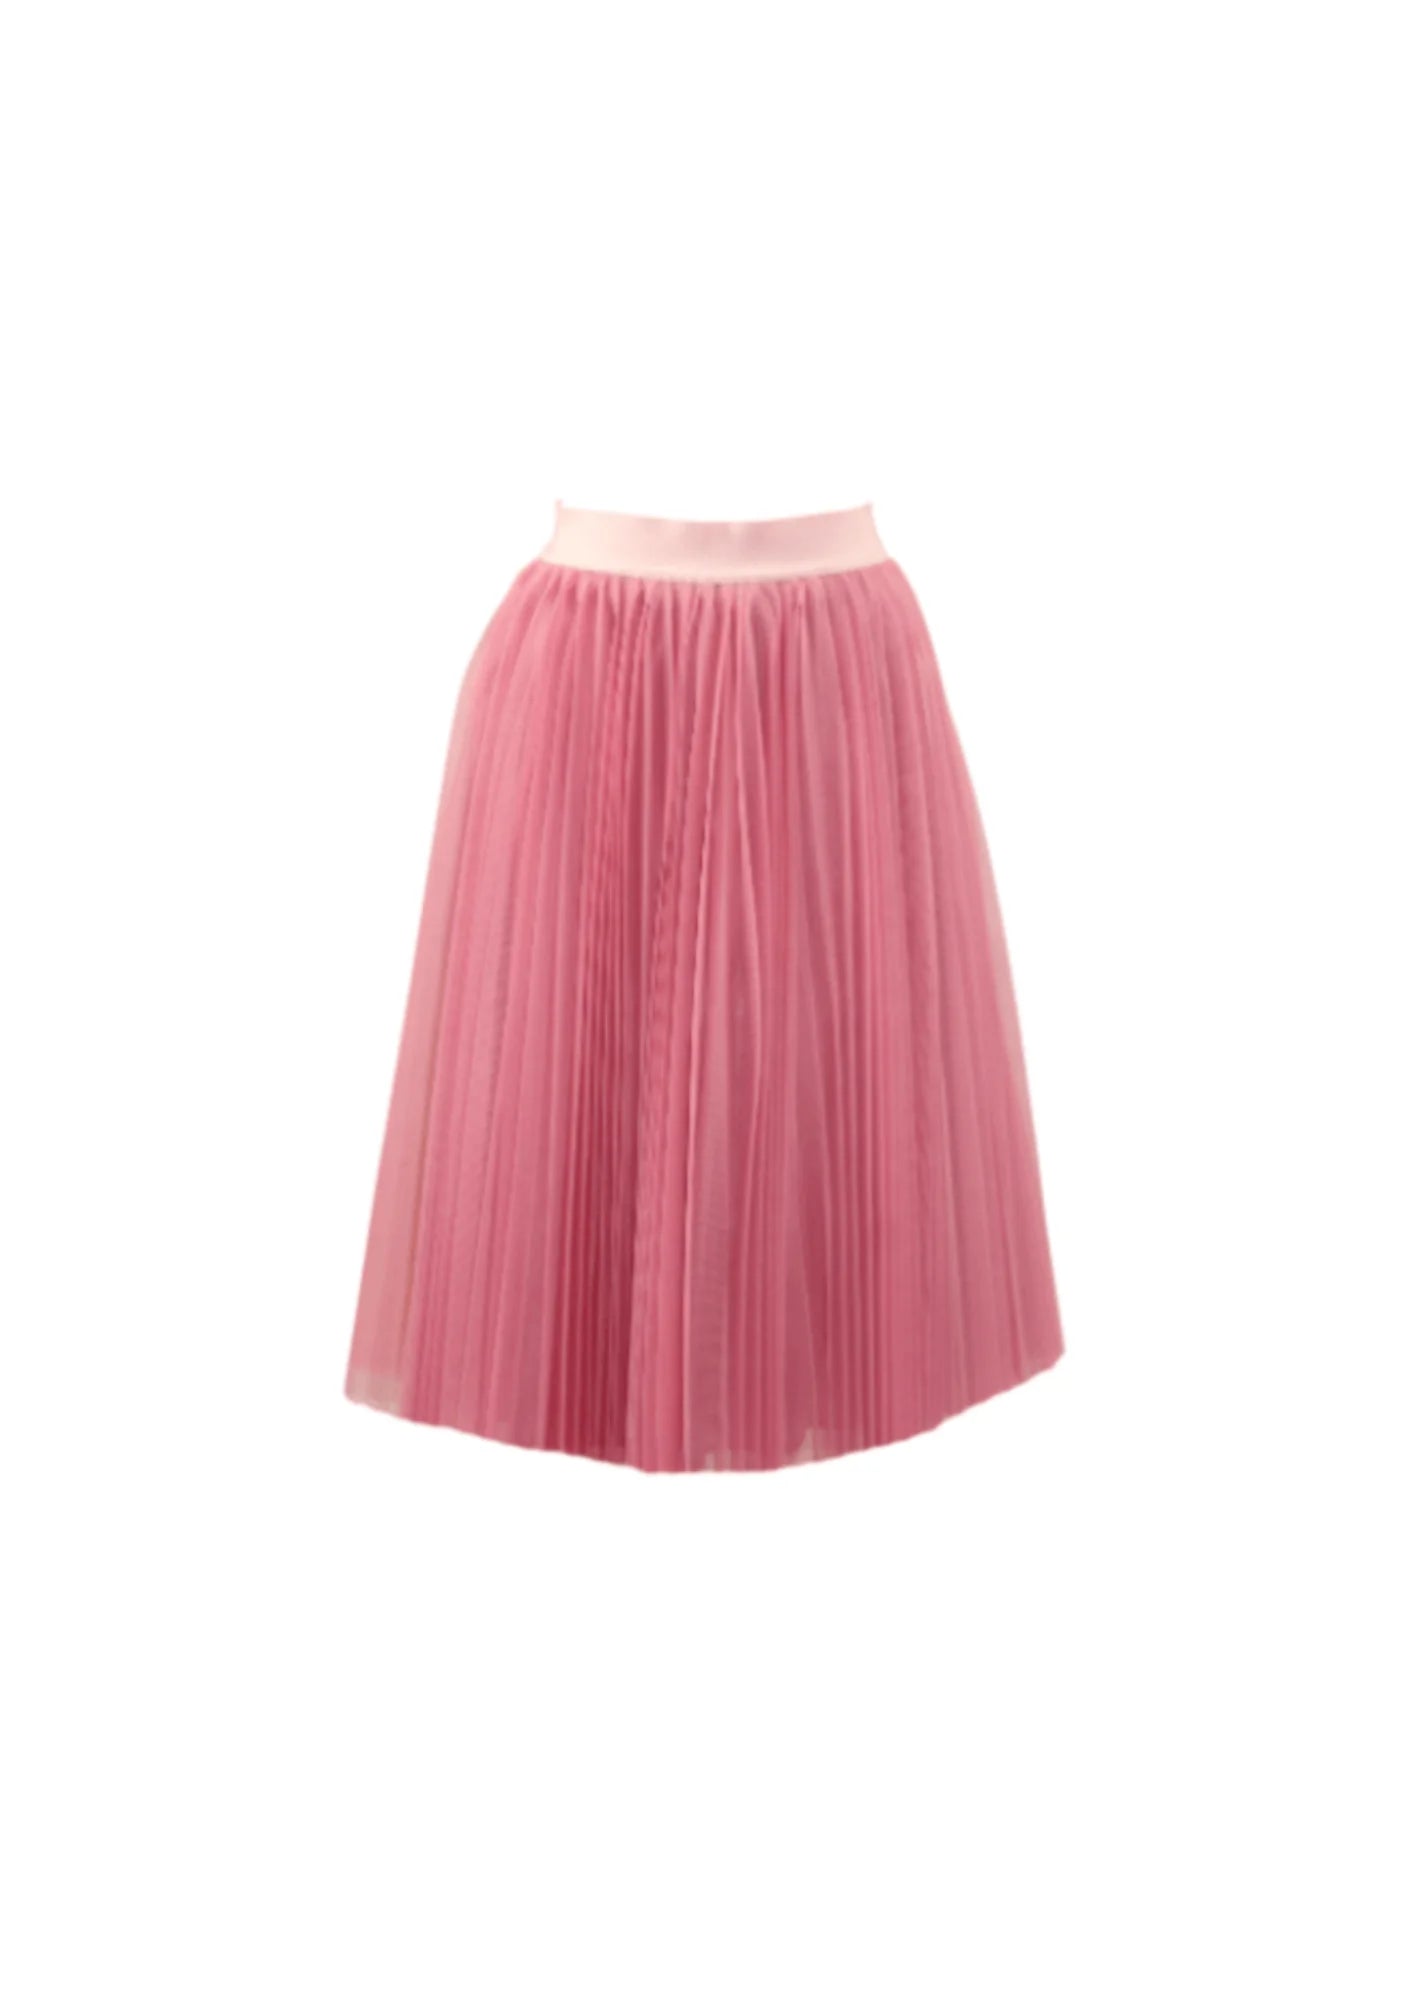 PINK SKIRT IN TULLE